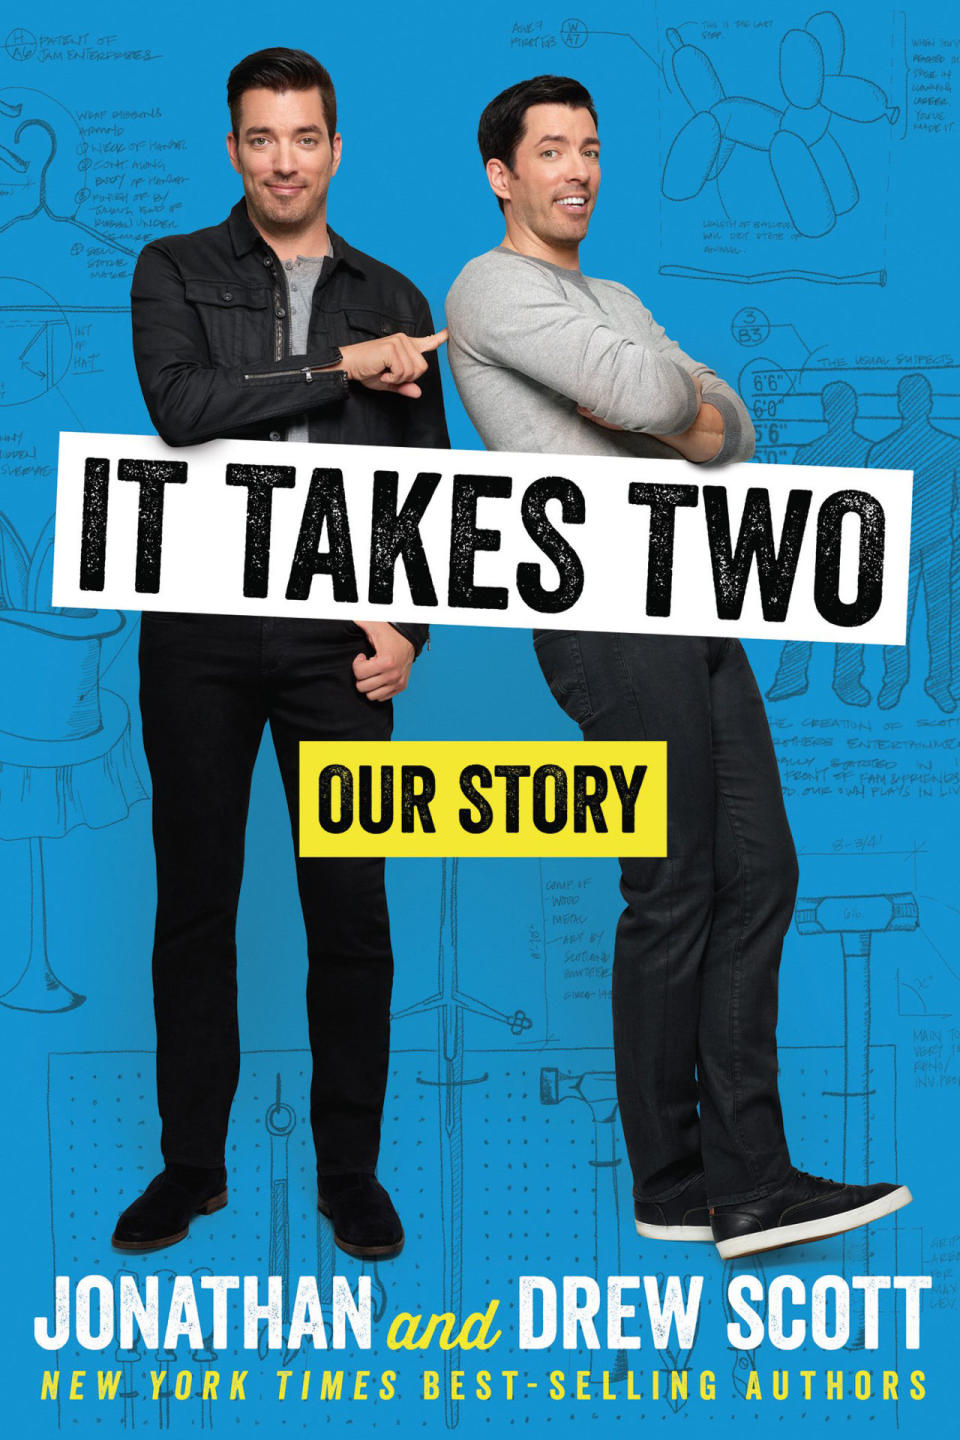 "It Takes Two: Our Story"